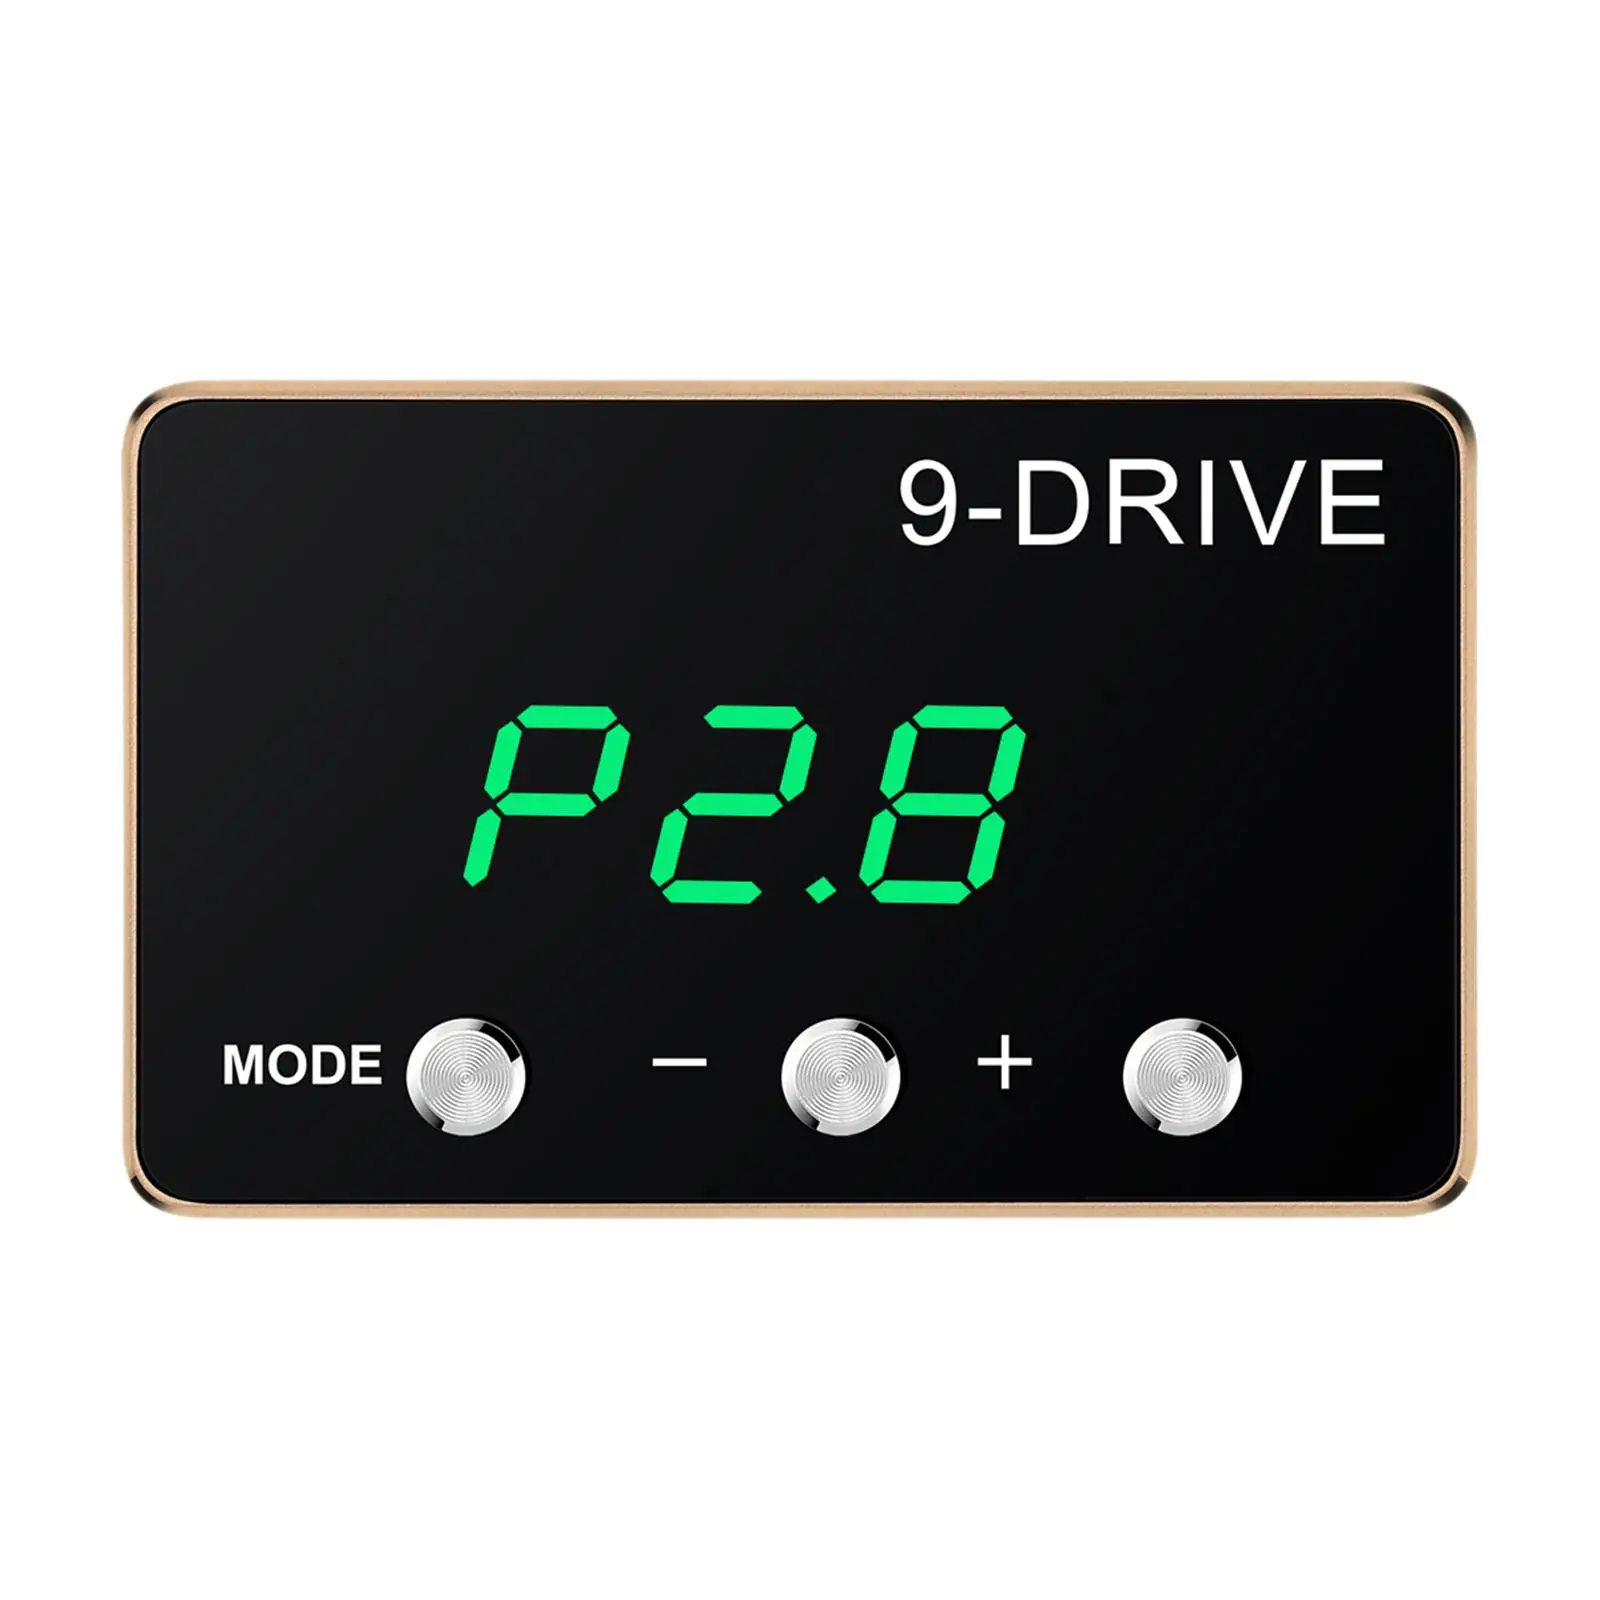 throttle Response Controller Dual Chip Design Comprehensive Driving Experience Increase Sensitivity Modification Accessory